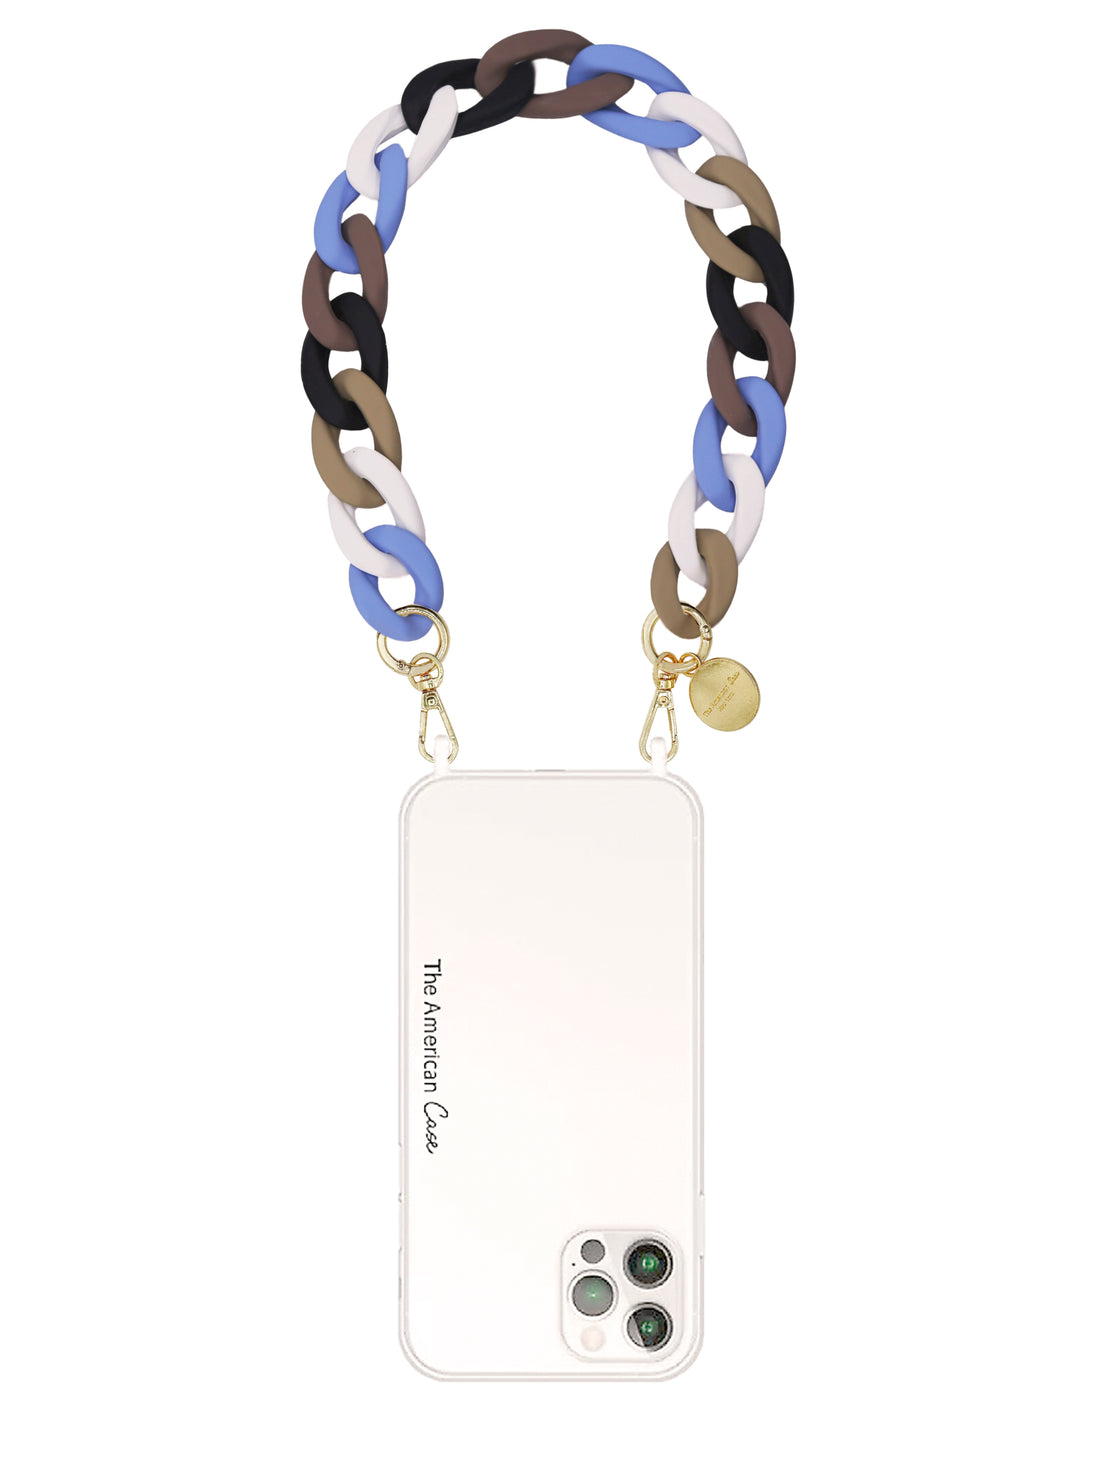 Magnolia - Multi-color Resin Links Bracelet Phone Chain with Golden Carabiners